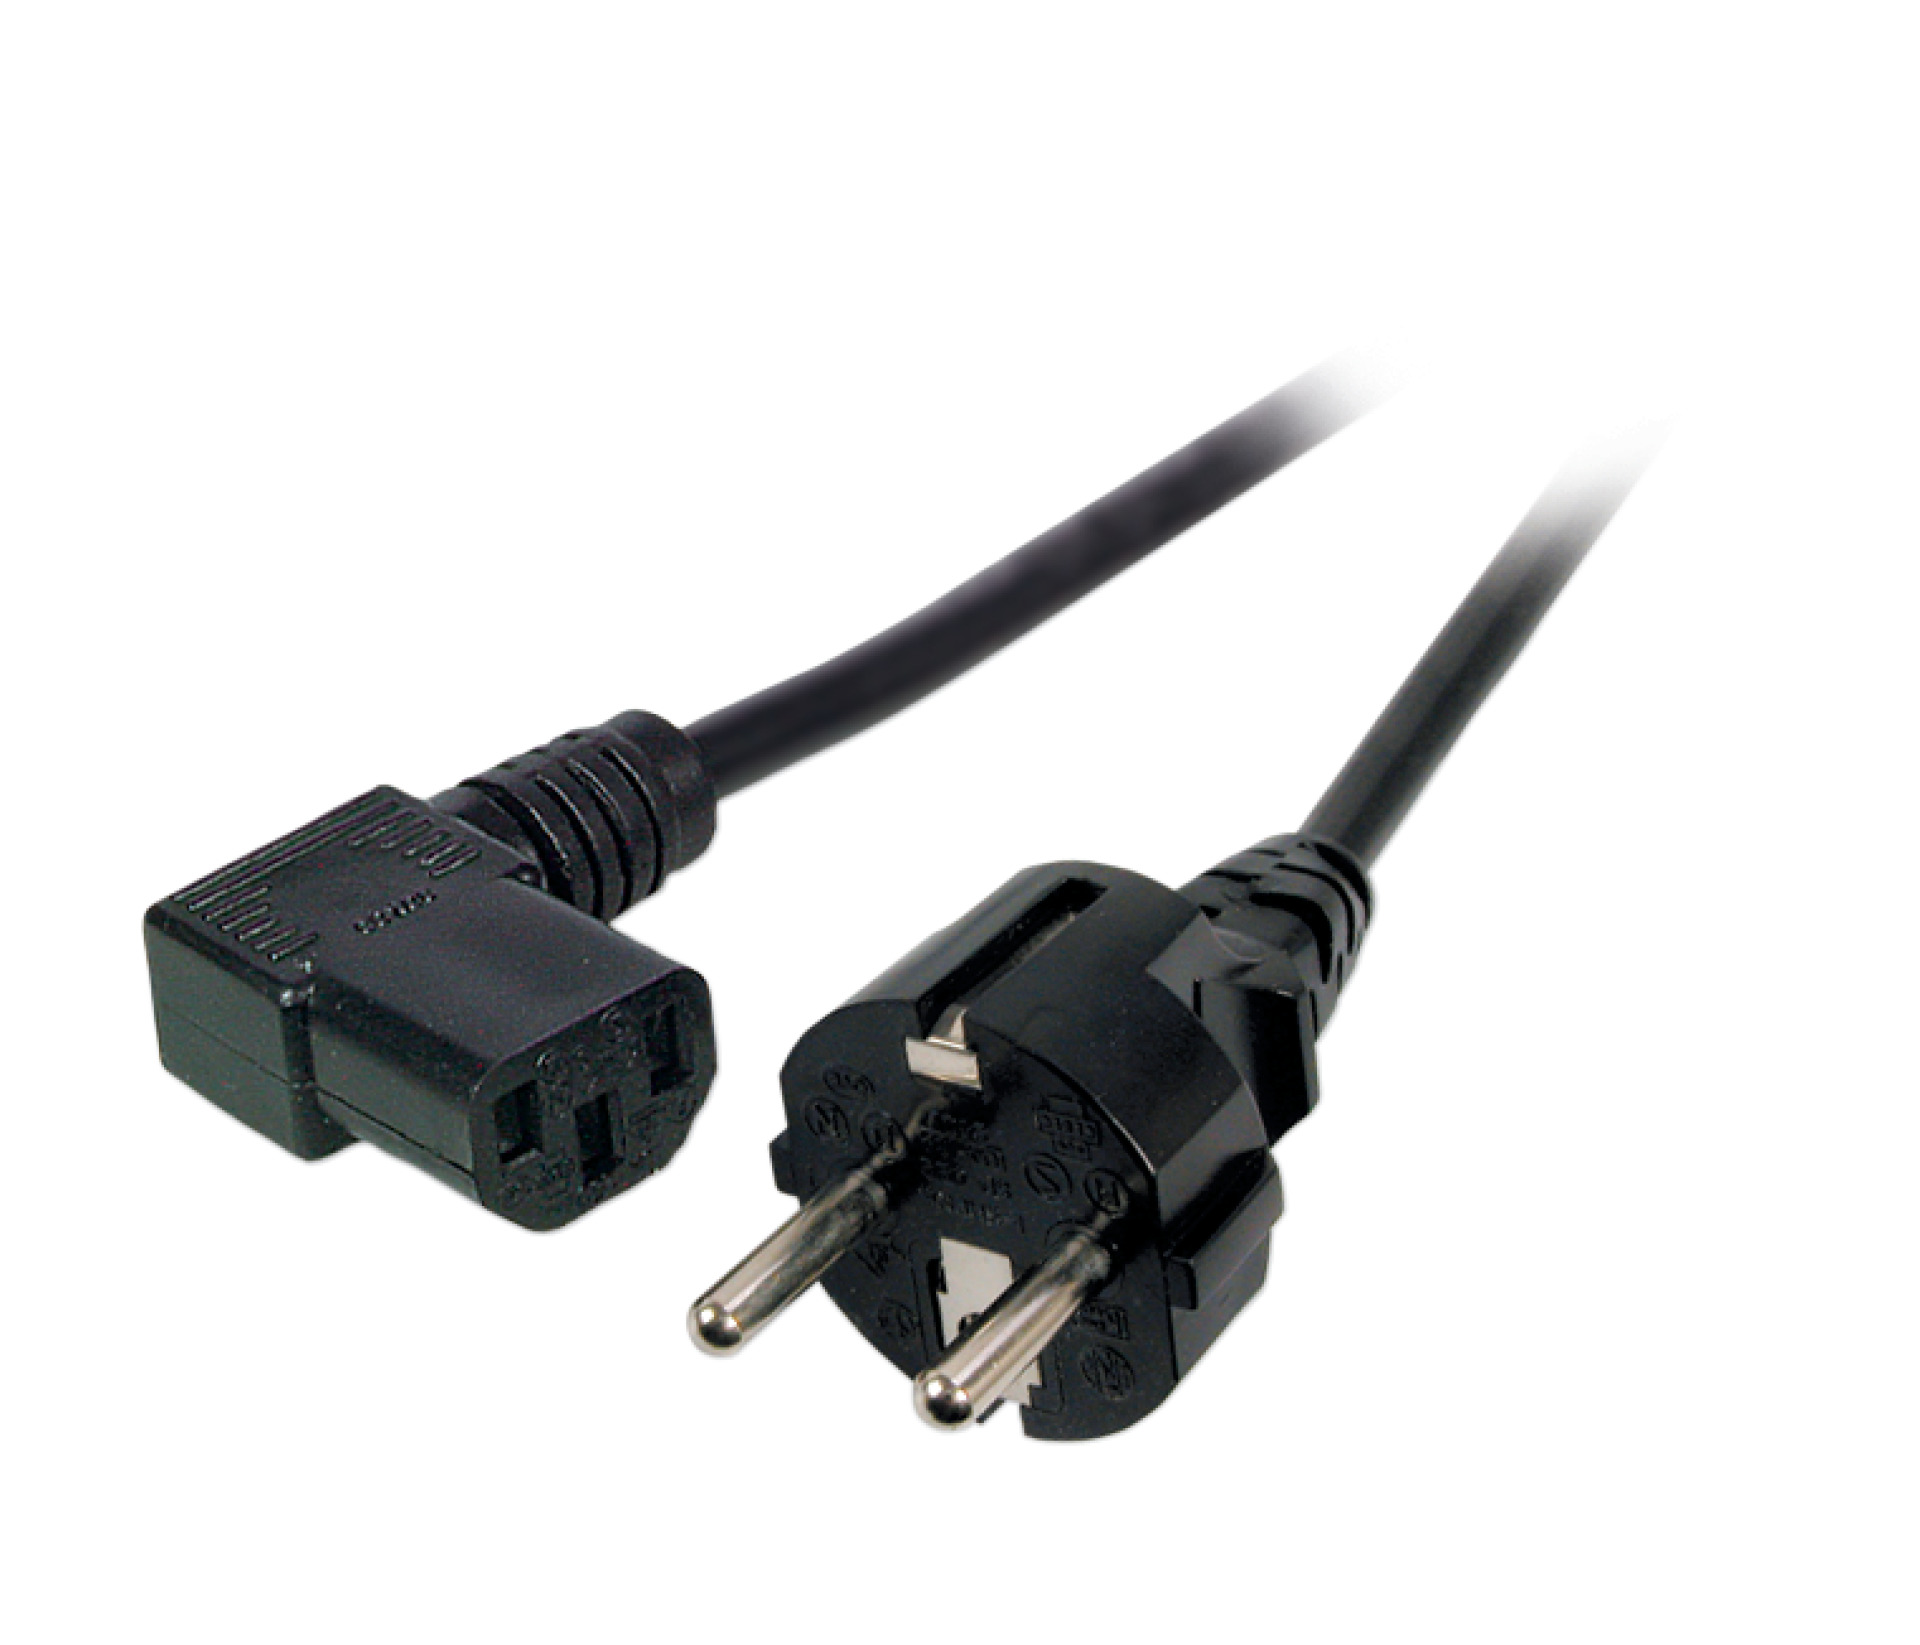 Power Cable CEE7/7 180° - C13 90°, Black, 2.0 m, 3 x 0.75 mm²